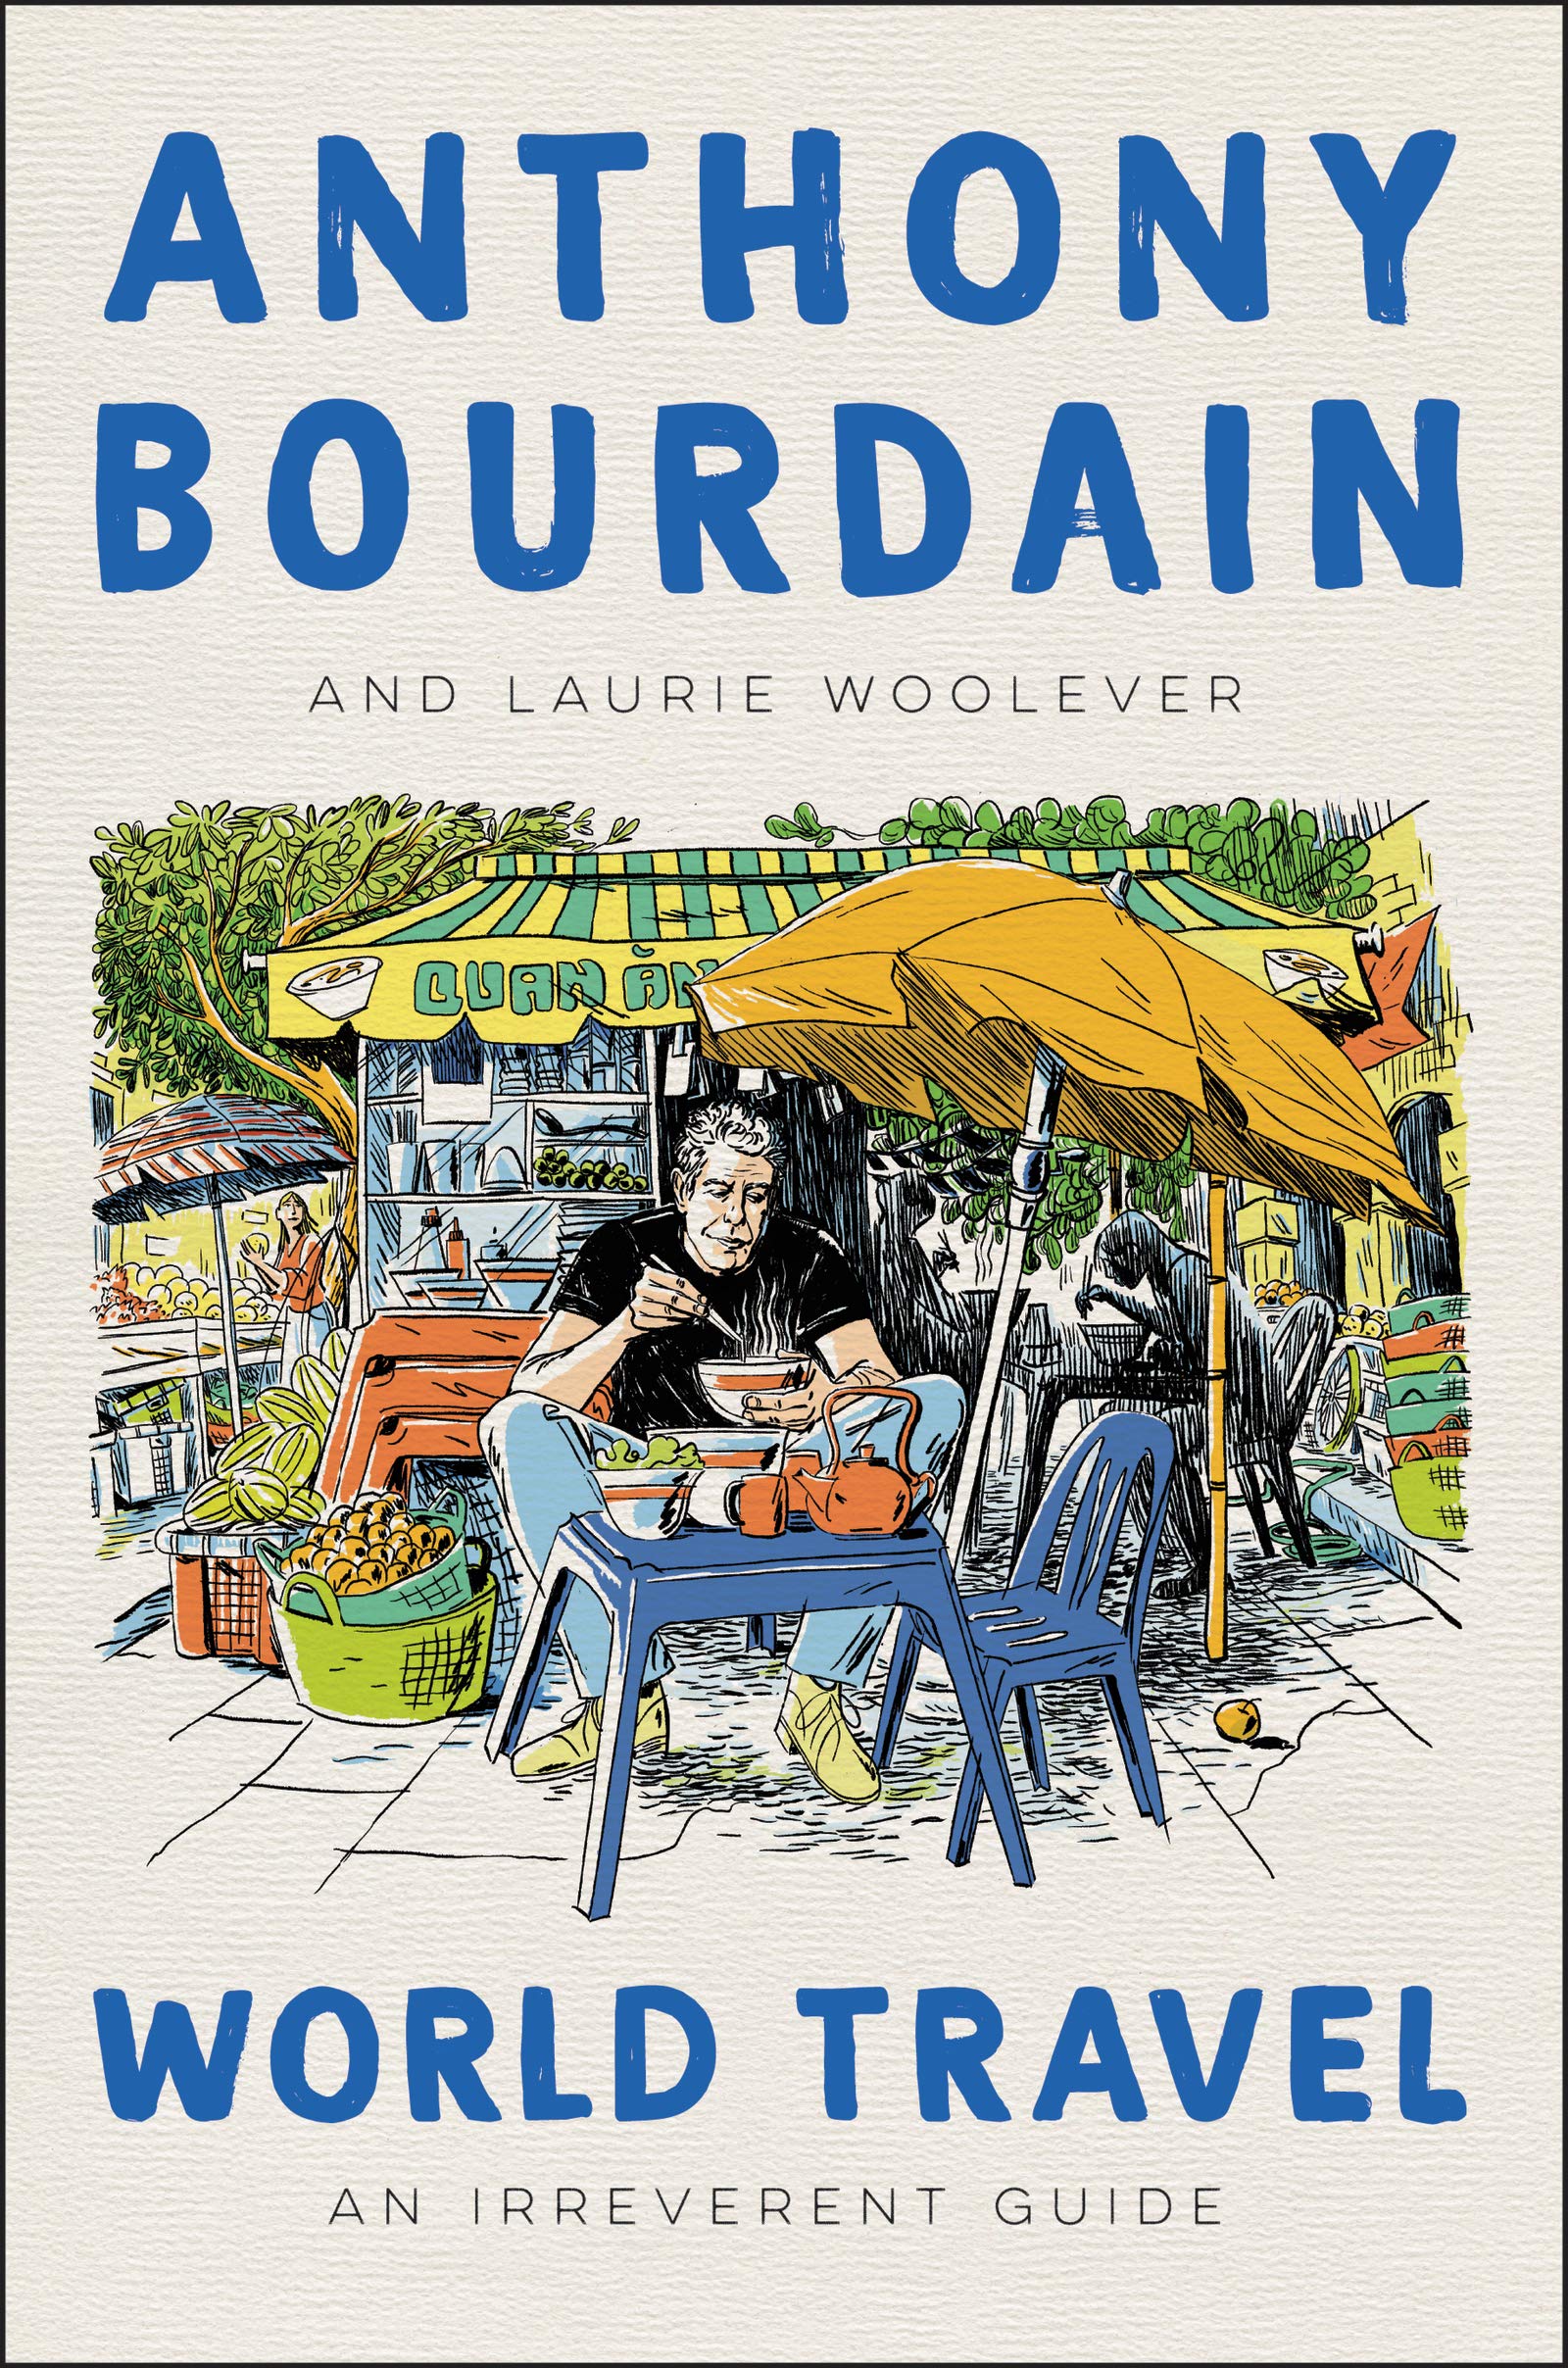 World Travel: An Irreverent Guide (Anthony Bourdain, Laurie Woolever) *Signed*